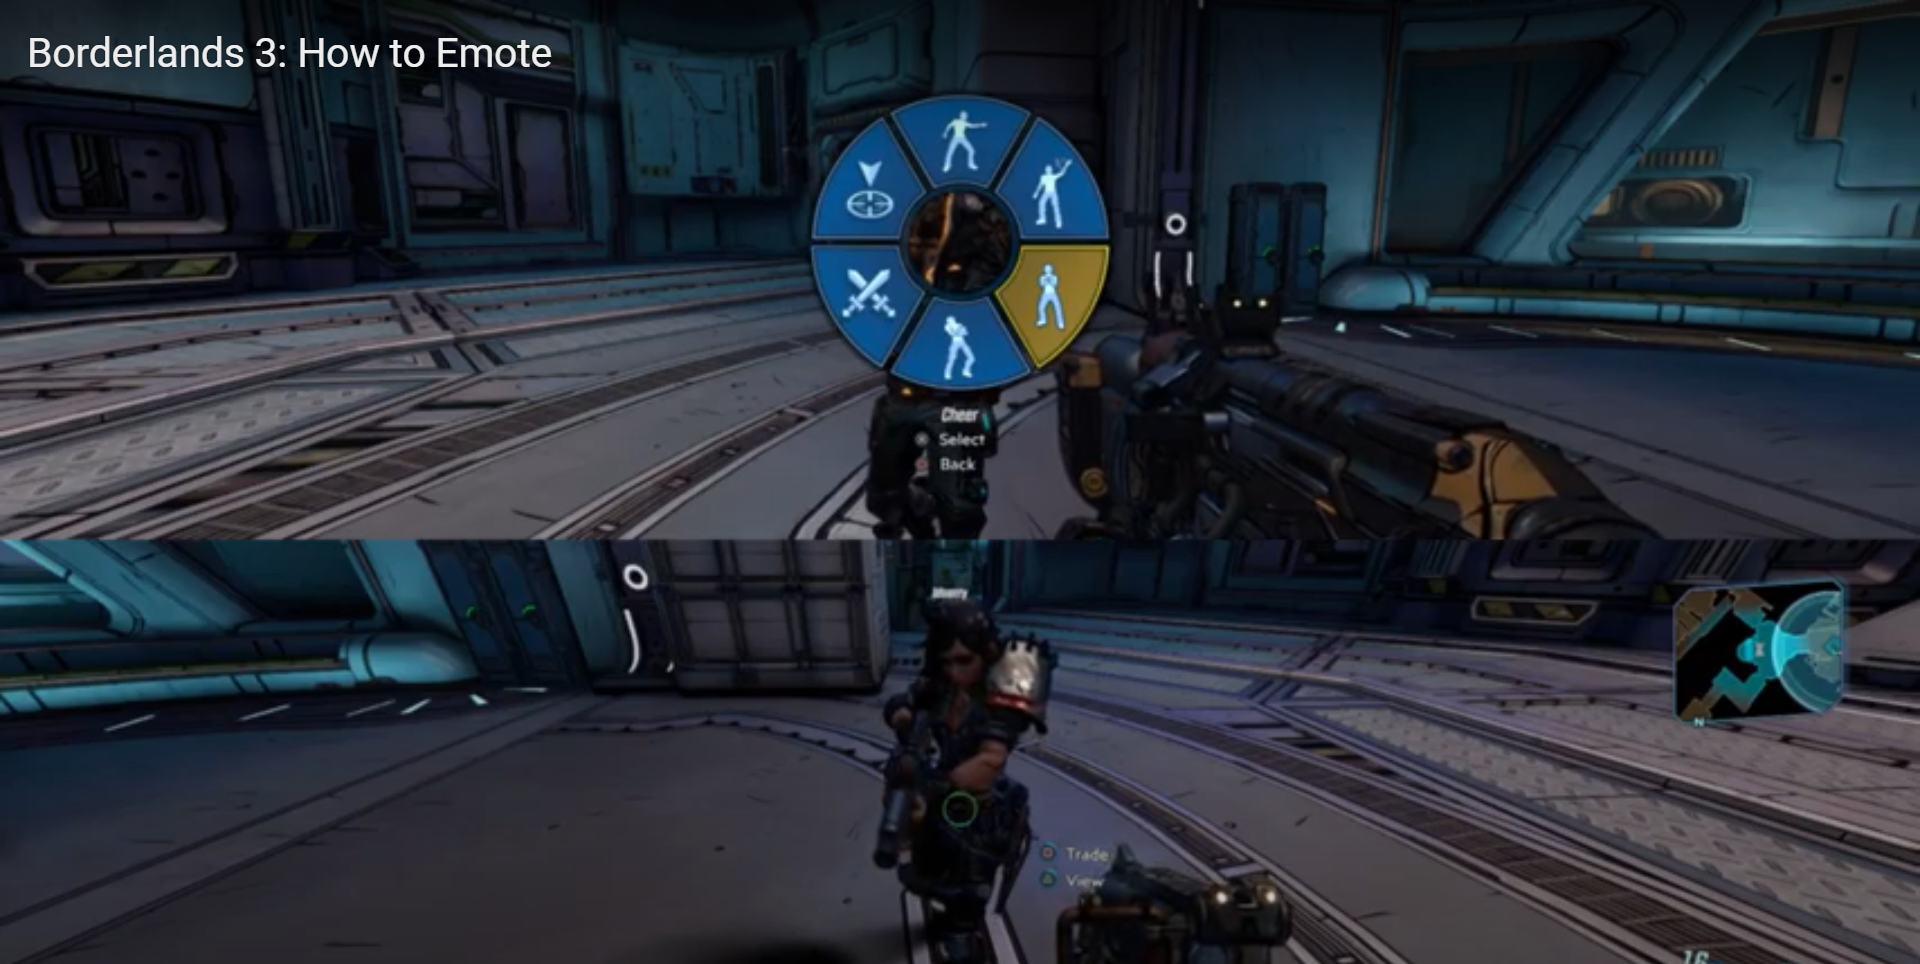 How to Emote in Borderlands 3 on PS4, Xbox, and PC